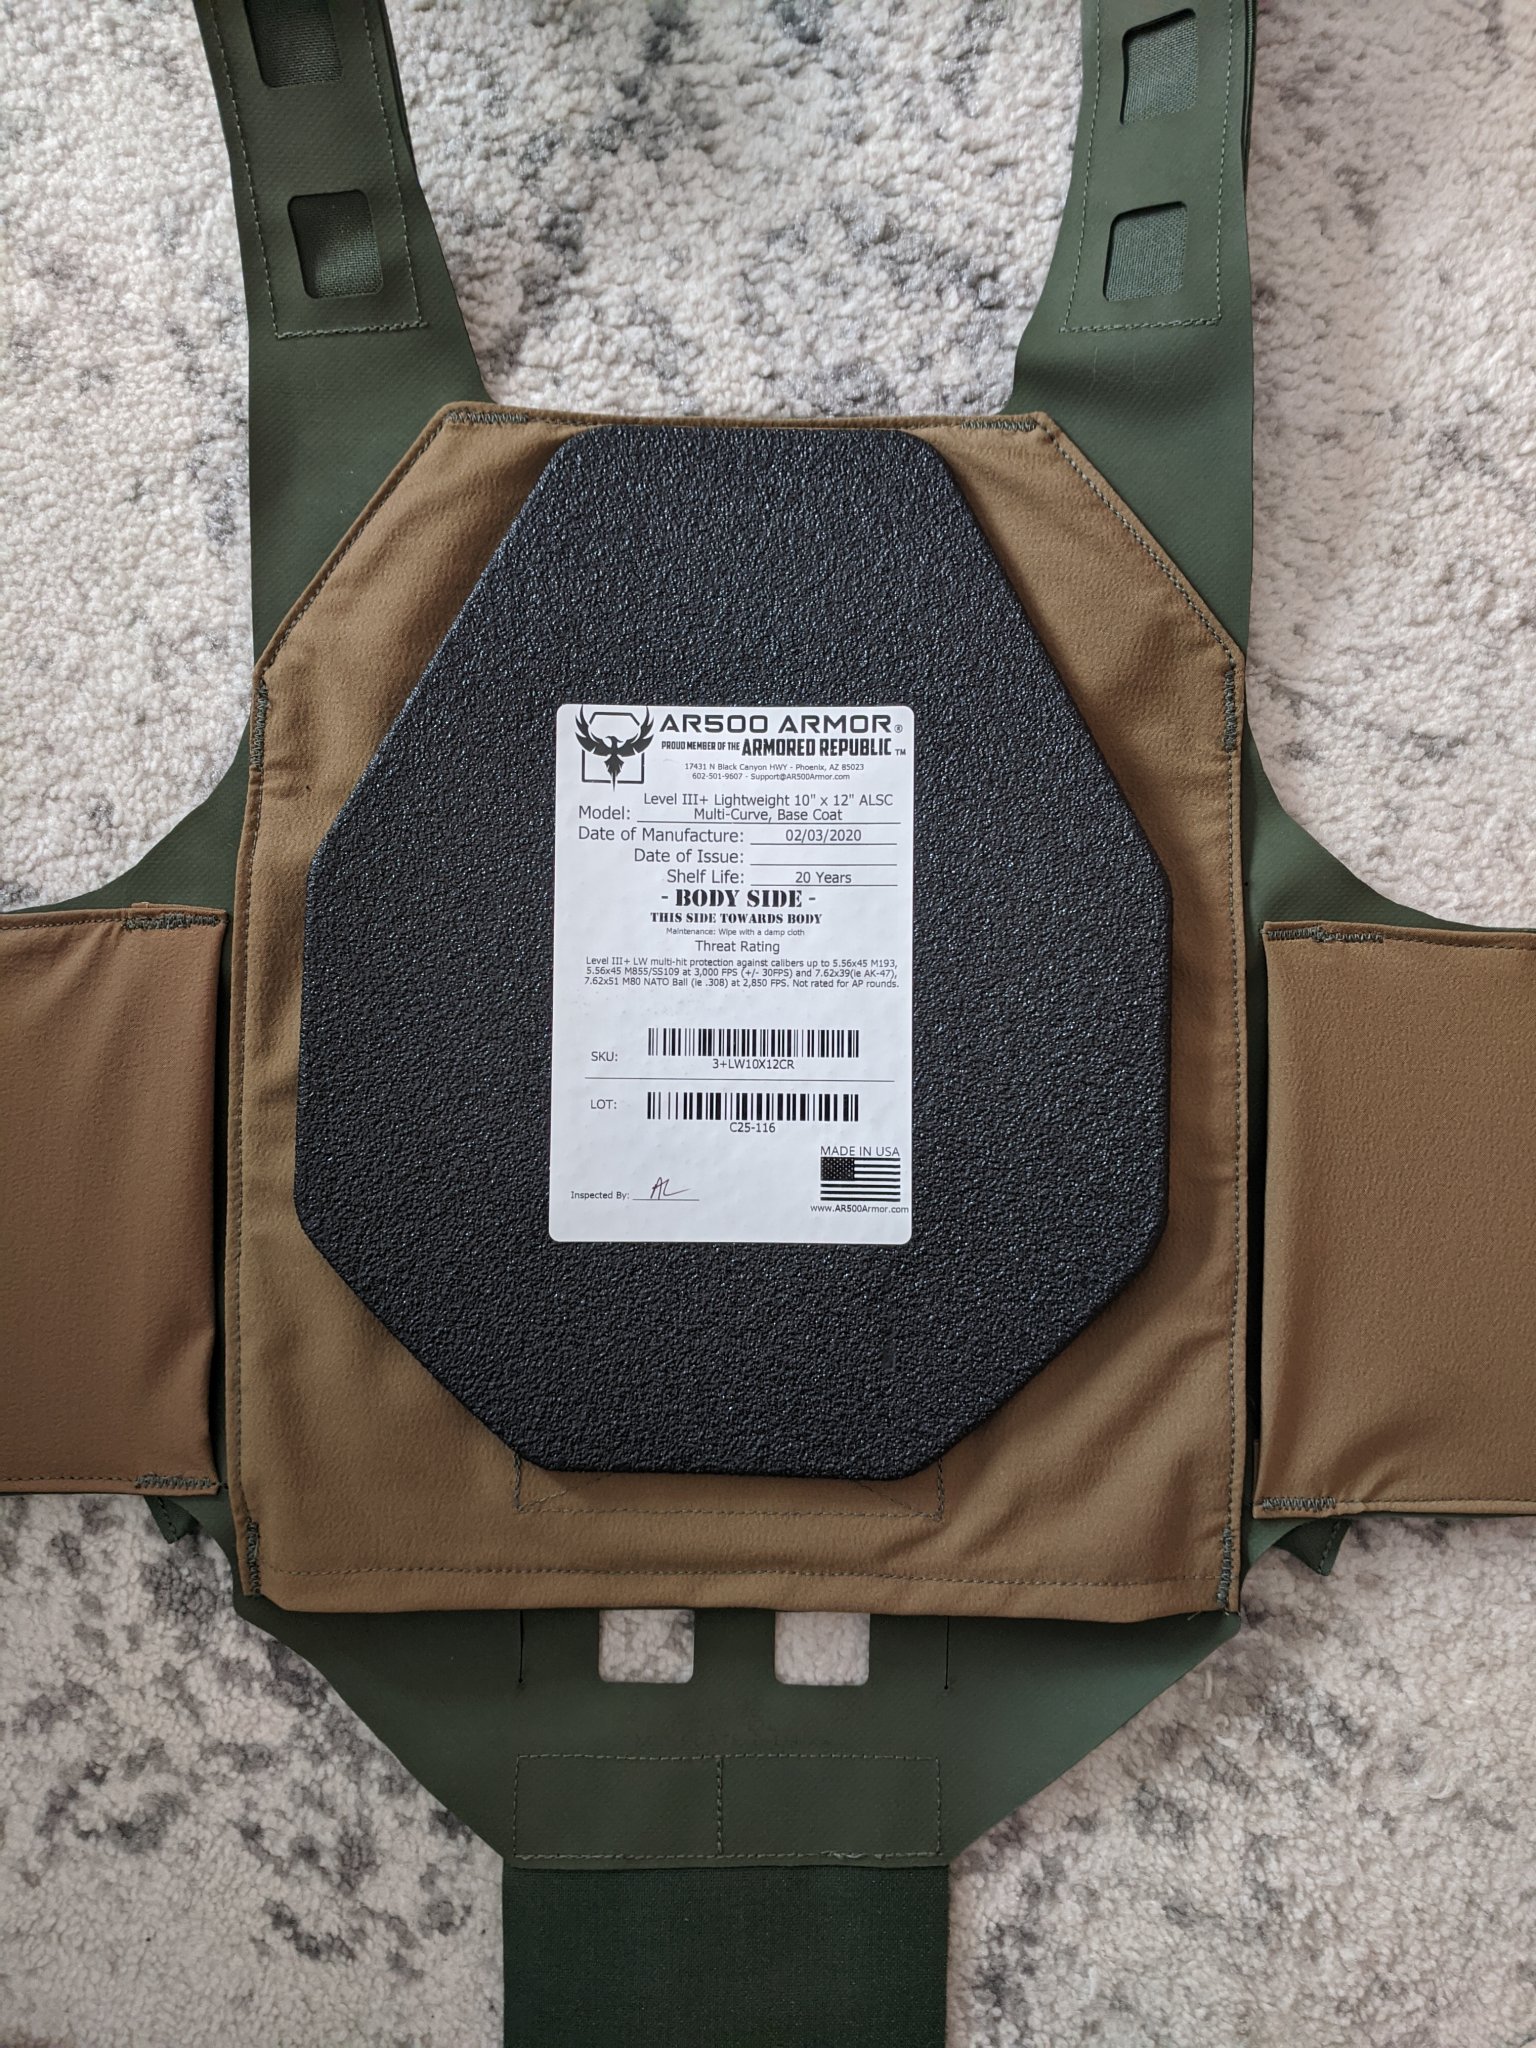 Spiritus Systems LV-119 Plate Carrier: One of the Best Options on the  Market